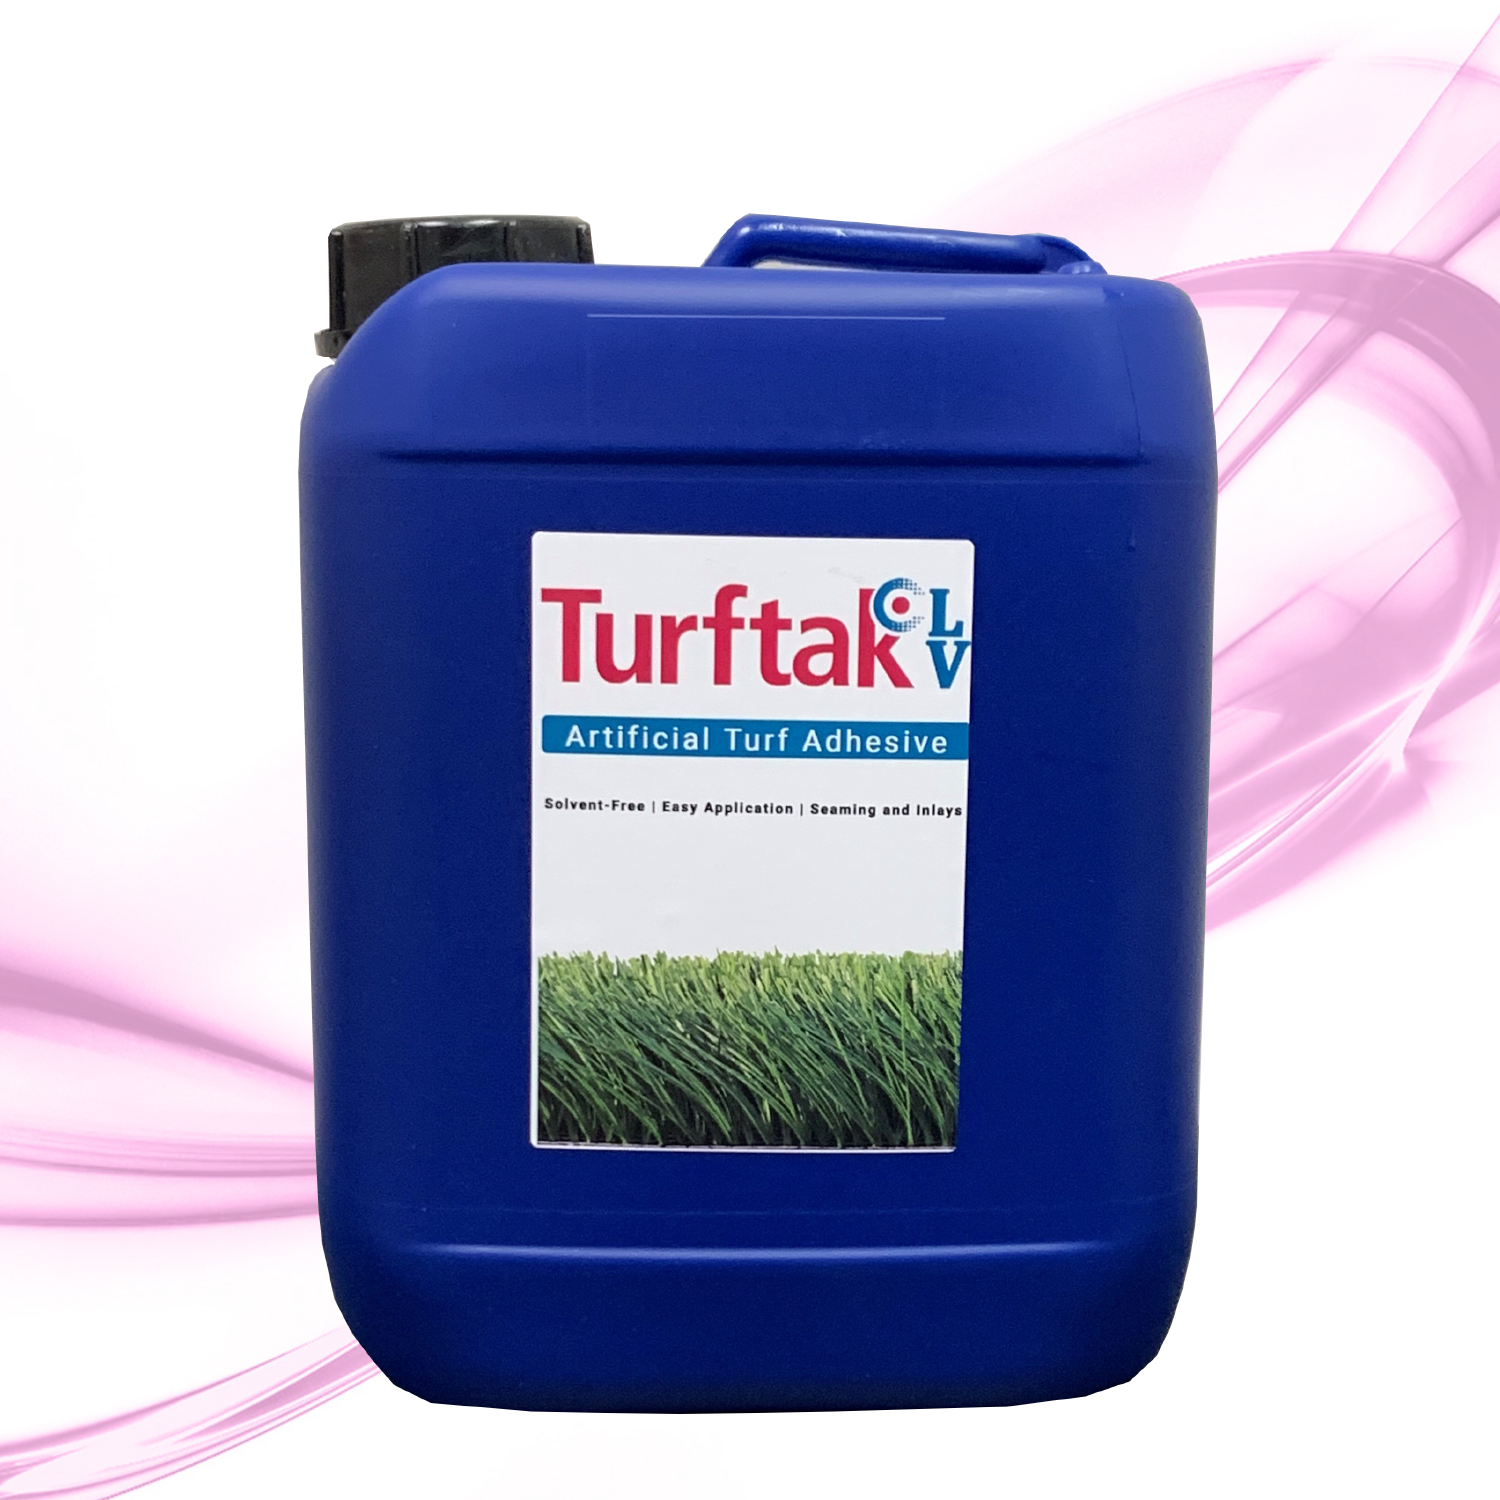 Turftak LV poly jugs are available for use with existing synthetic turf glue boxes.